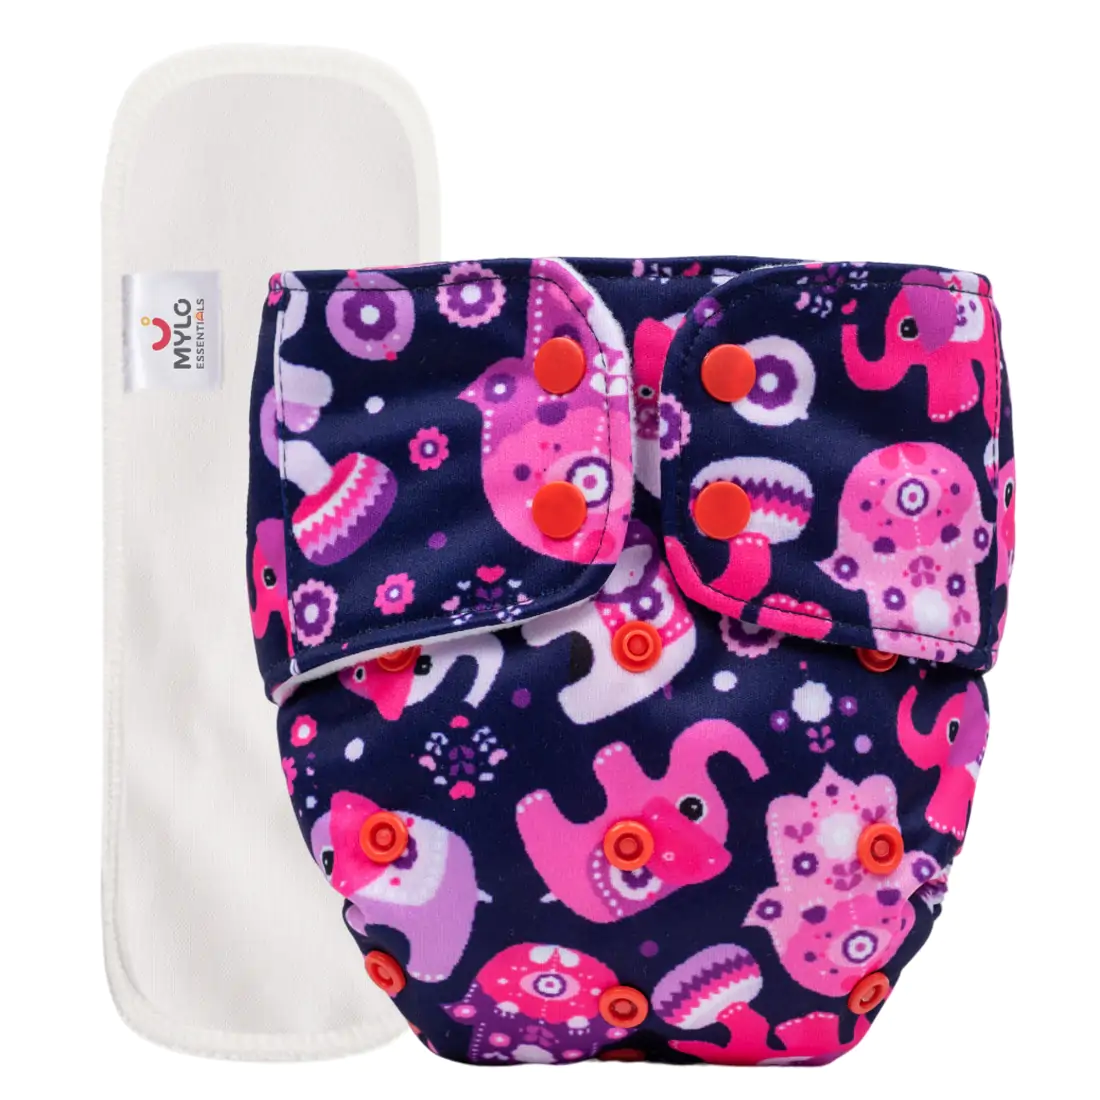 Buy Mylo Essentials Cloth Diaper for Babies, Oeko-Tex  Certified, (3Months-3Years), 5kg-17kg, Reusable with Adjustable Snap  Button